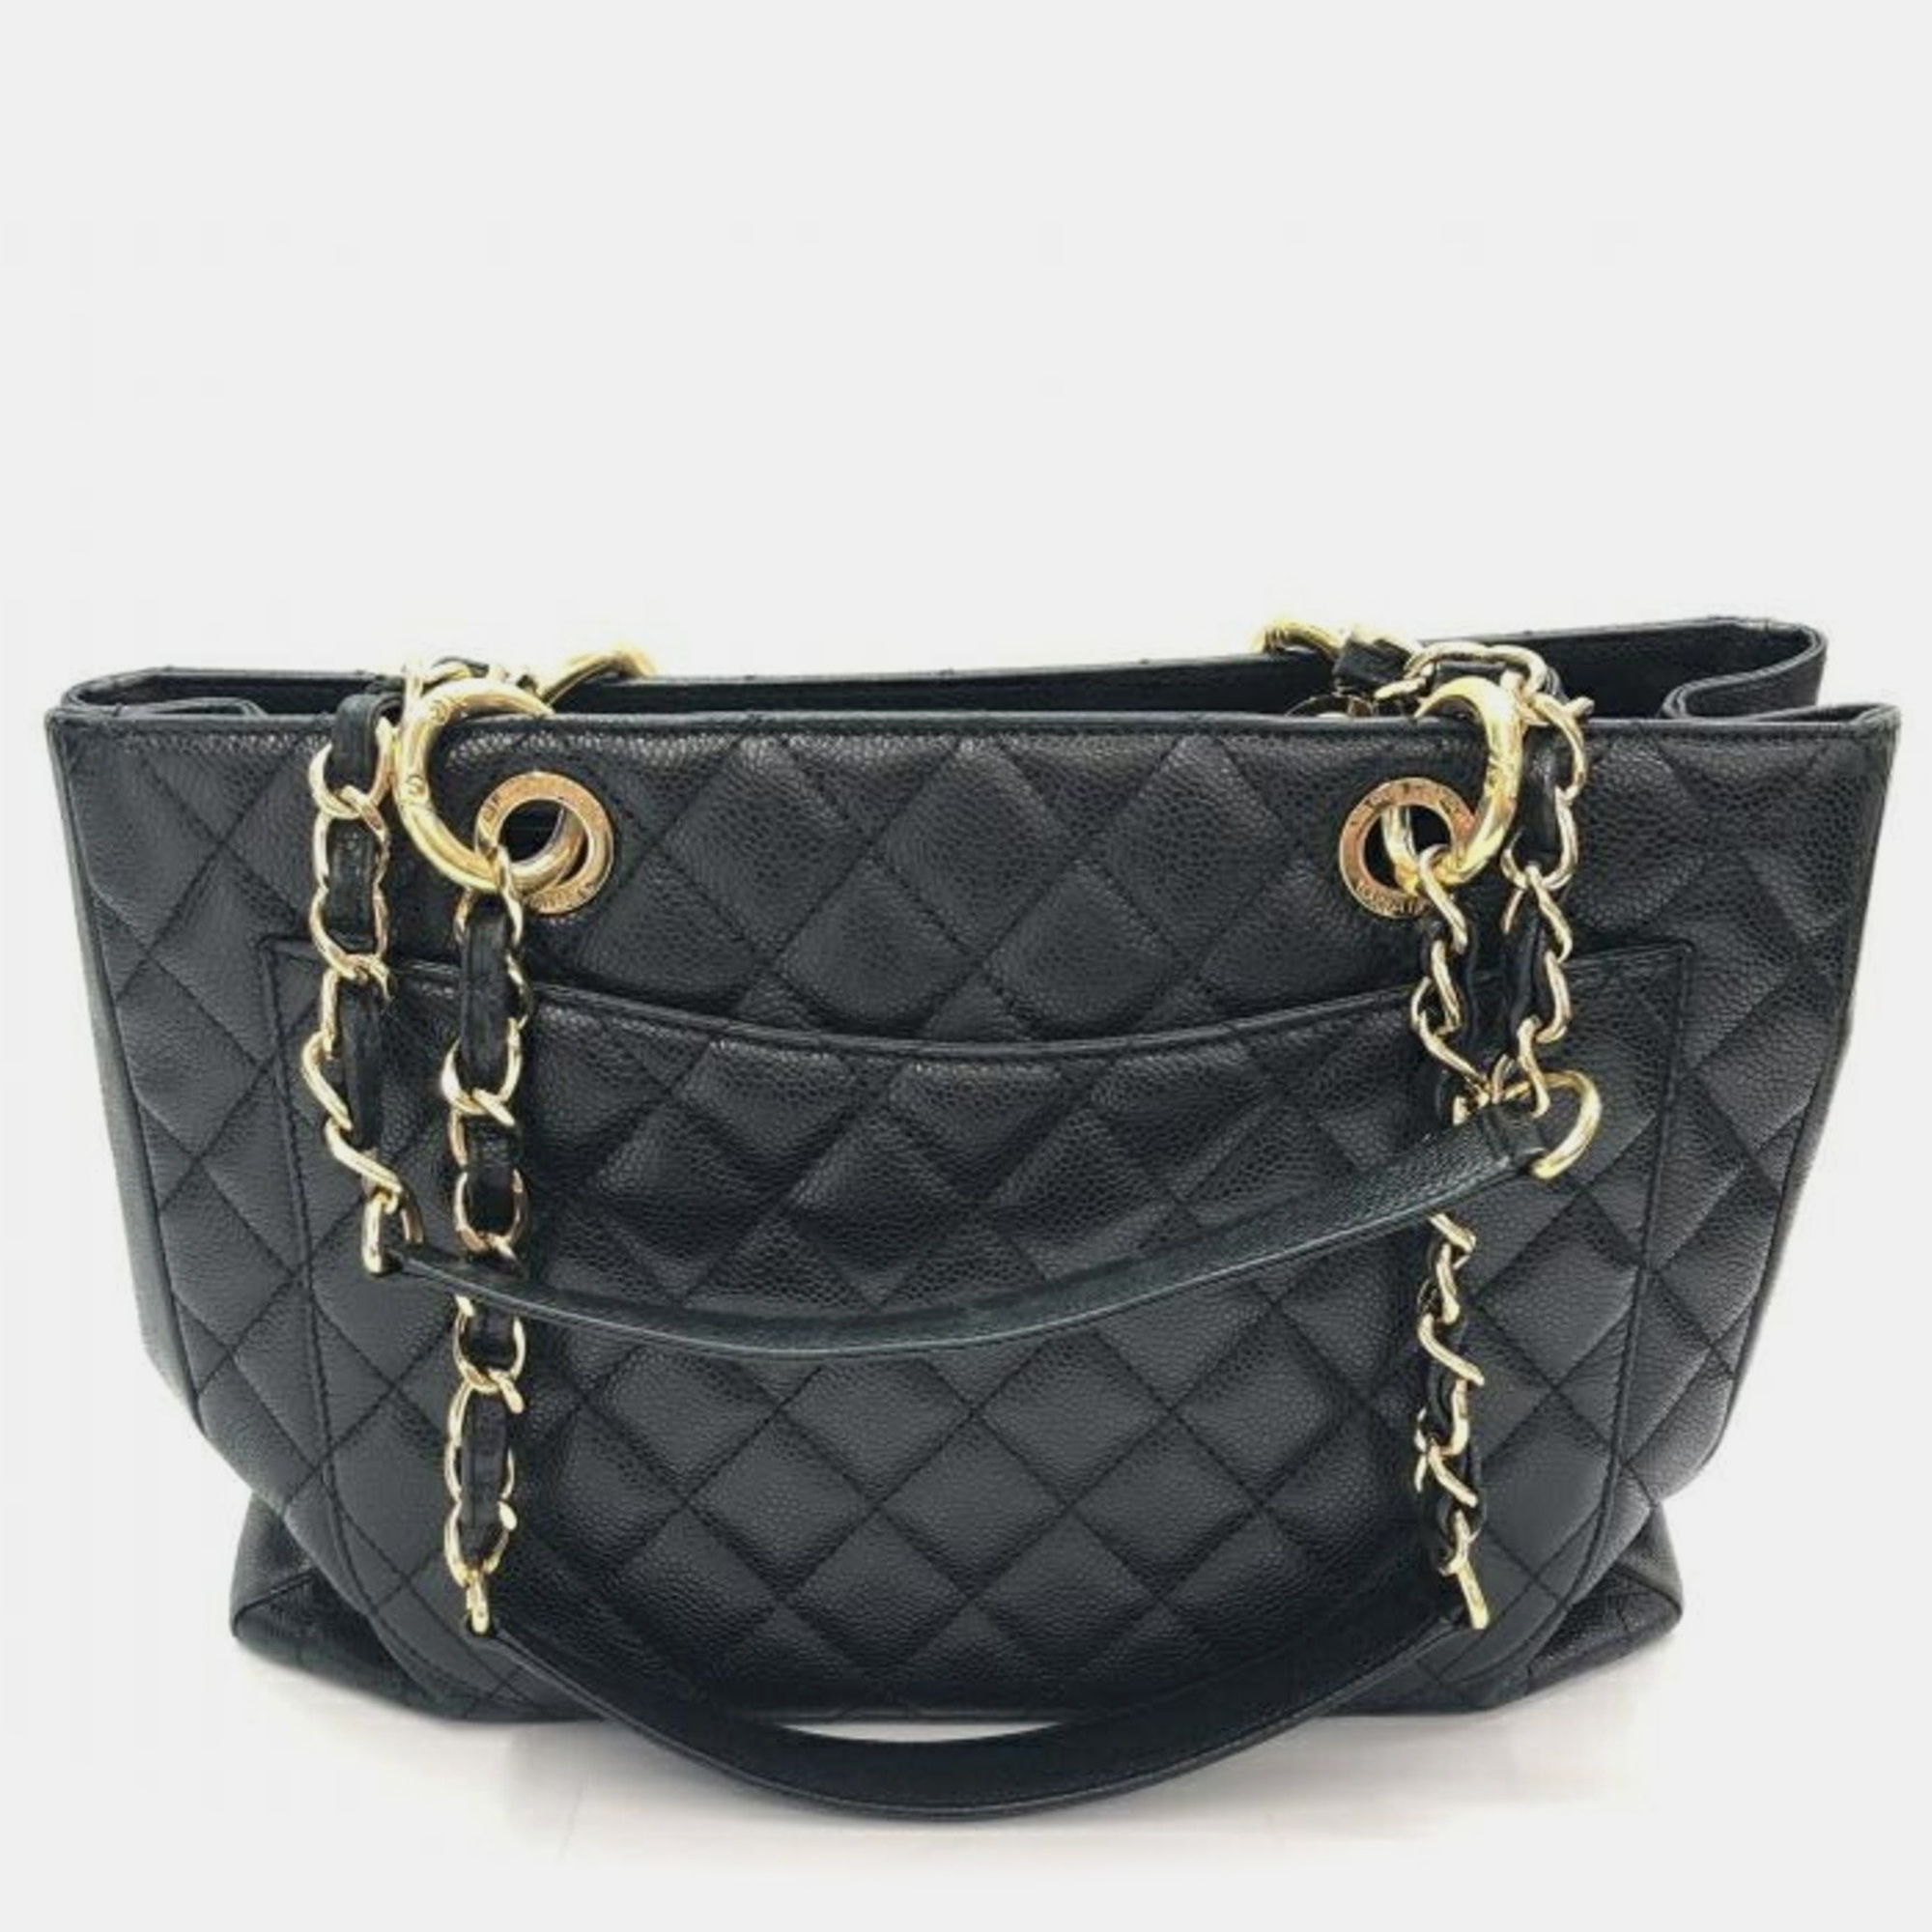 Pre-owned Chanel Black Caviar Leather Gst Tote